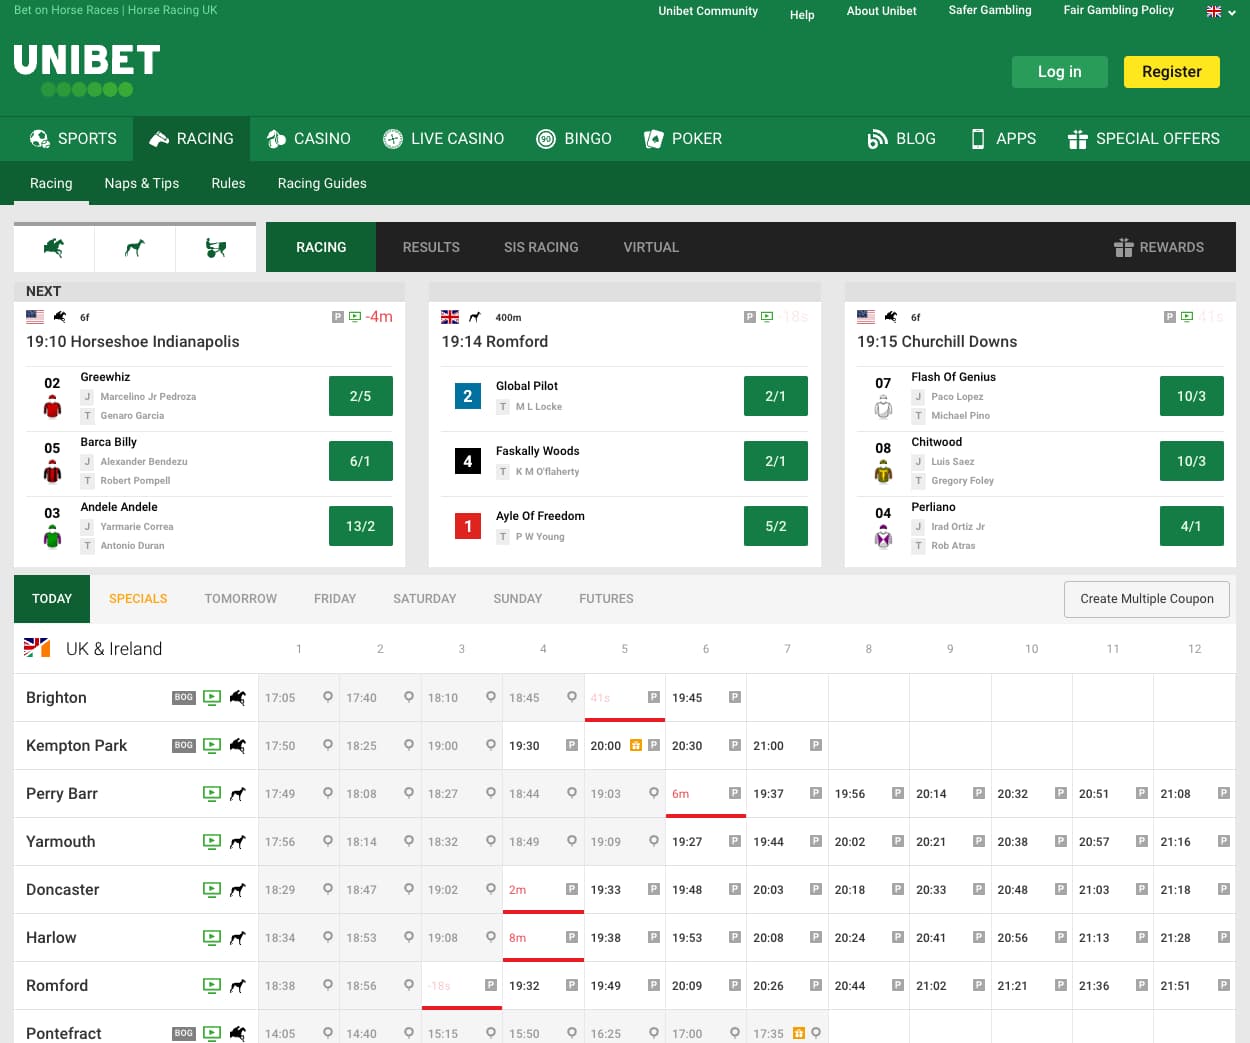 Unibet is one of the best bookies for horse racing.